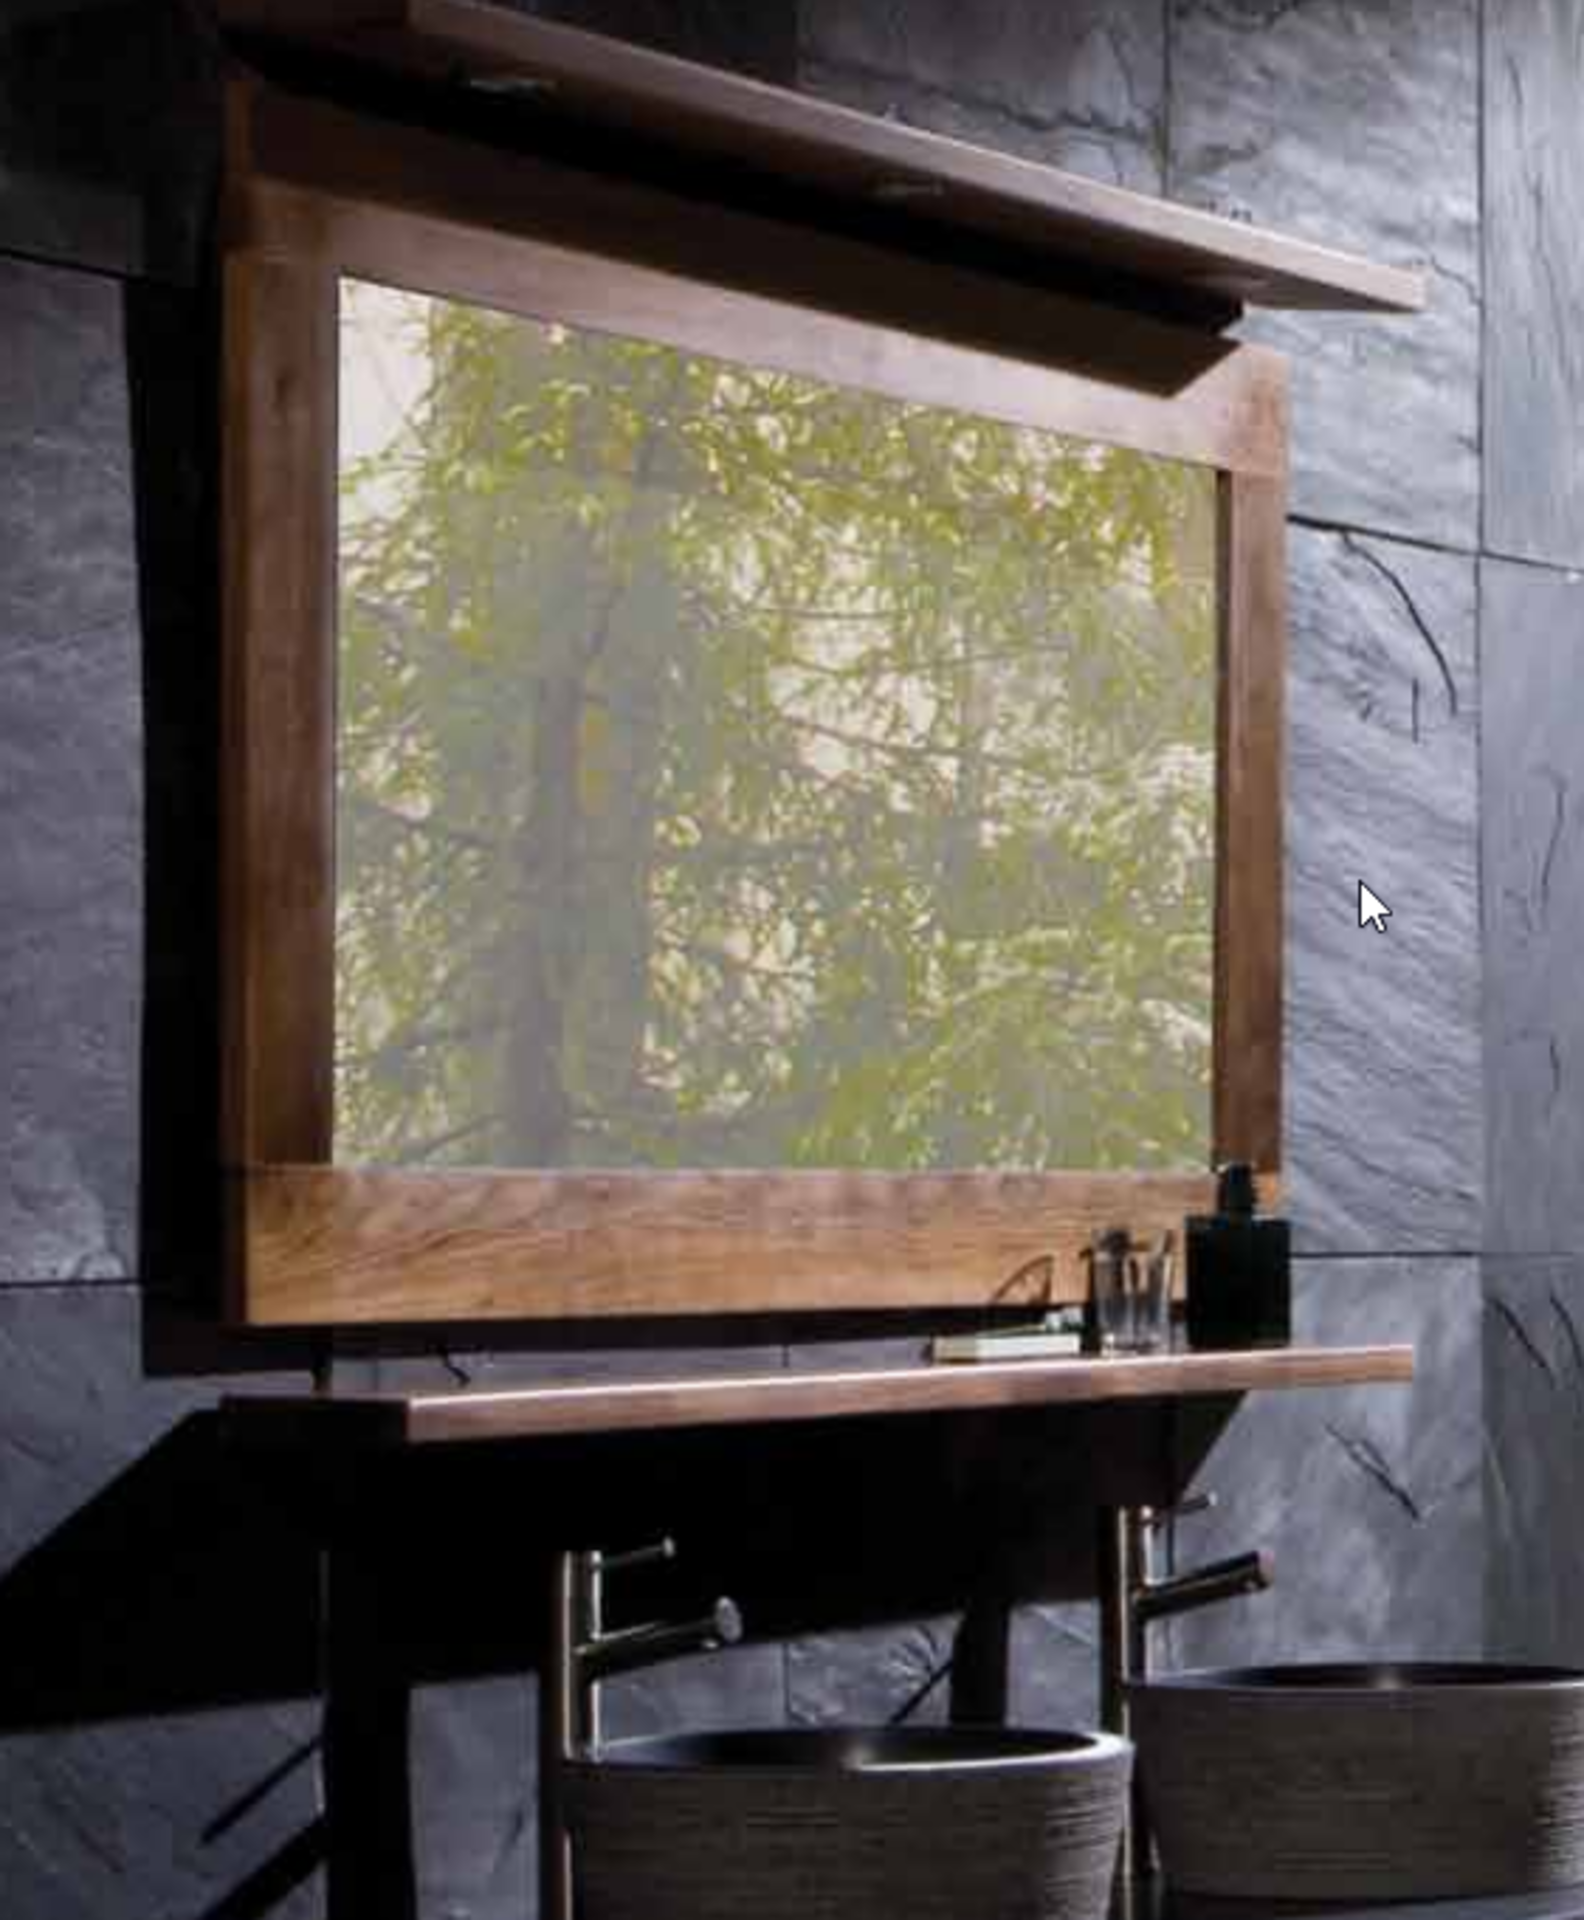 1 x Stonearth Medium Wall Mirror Frame - American Solid Walnut Frame For Mirrors or Pictures - Image 3 of 12